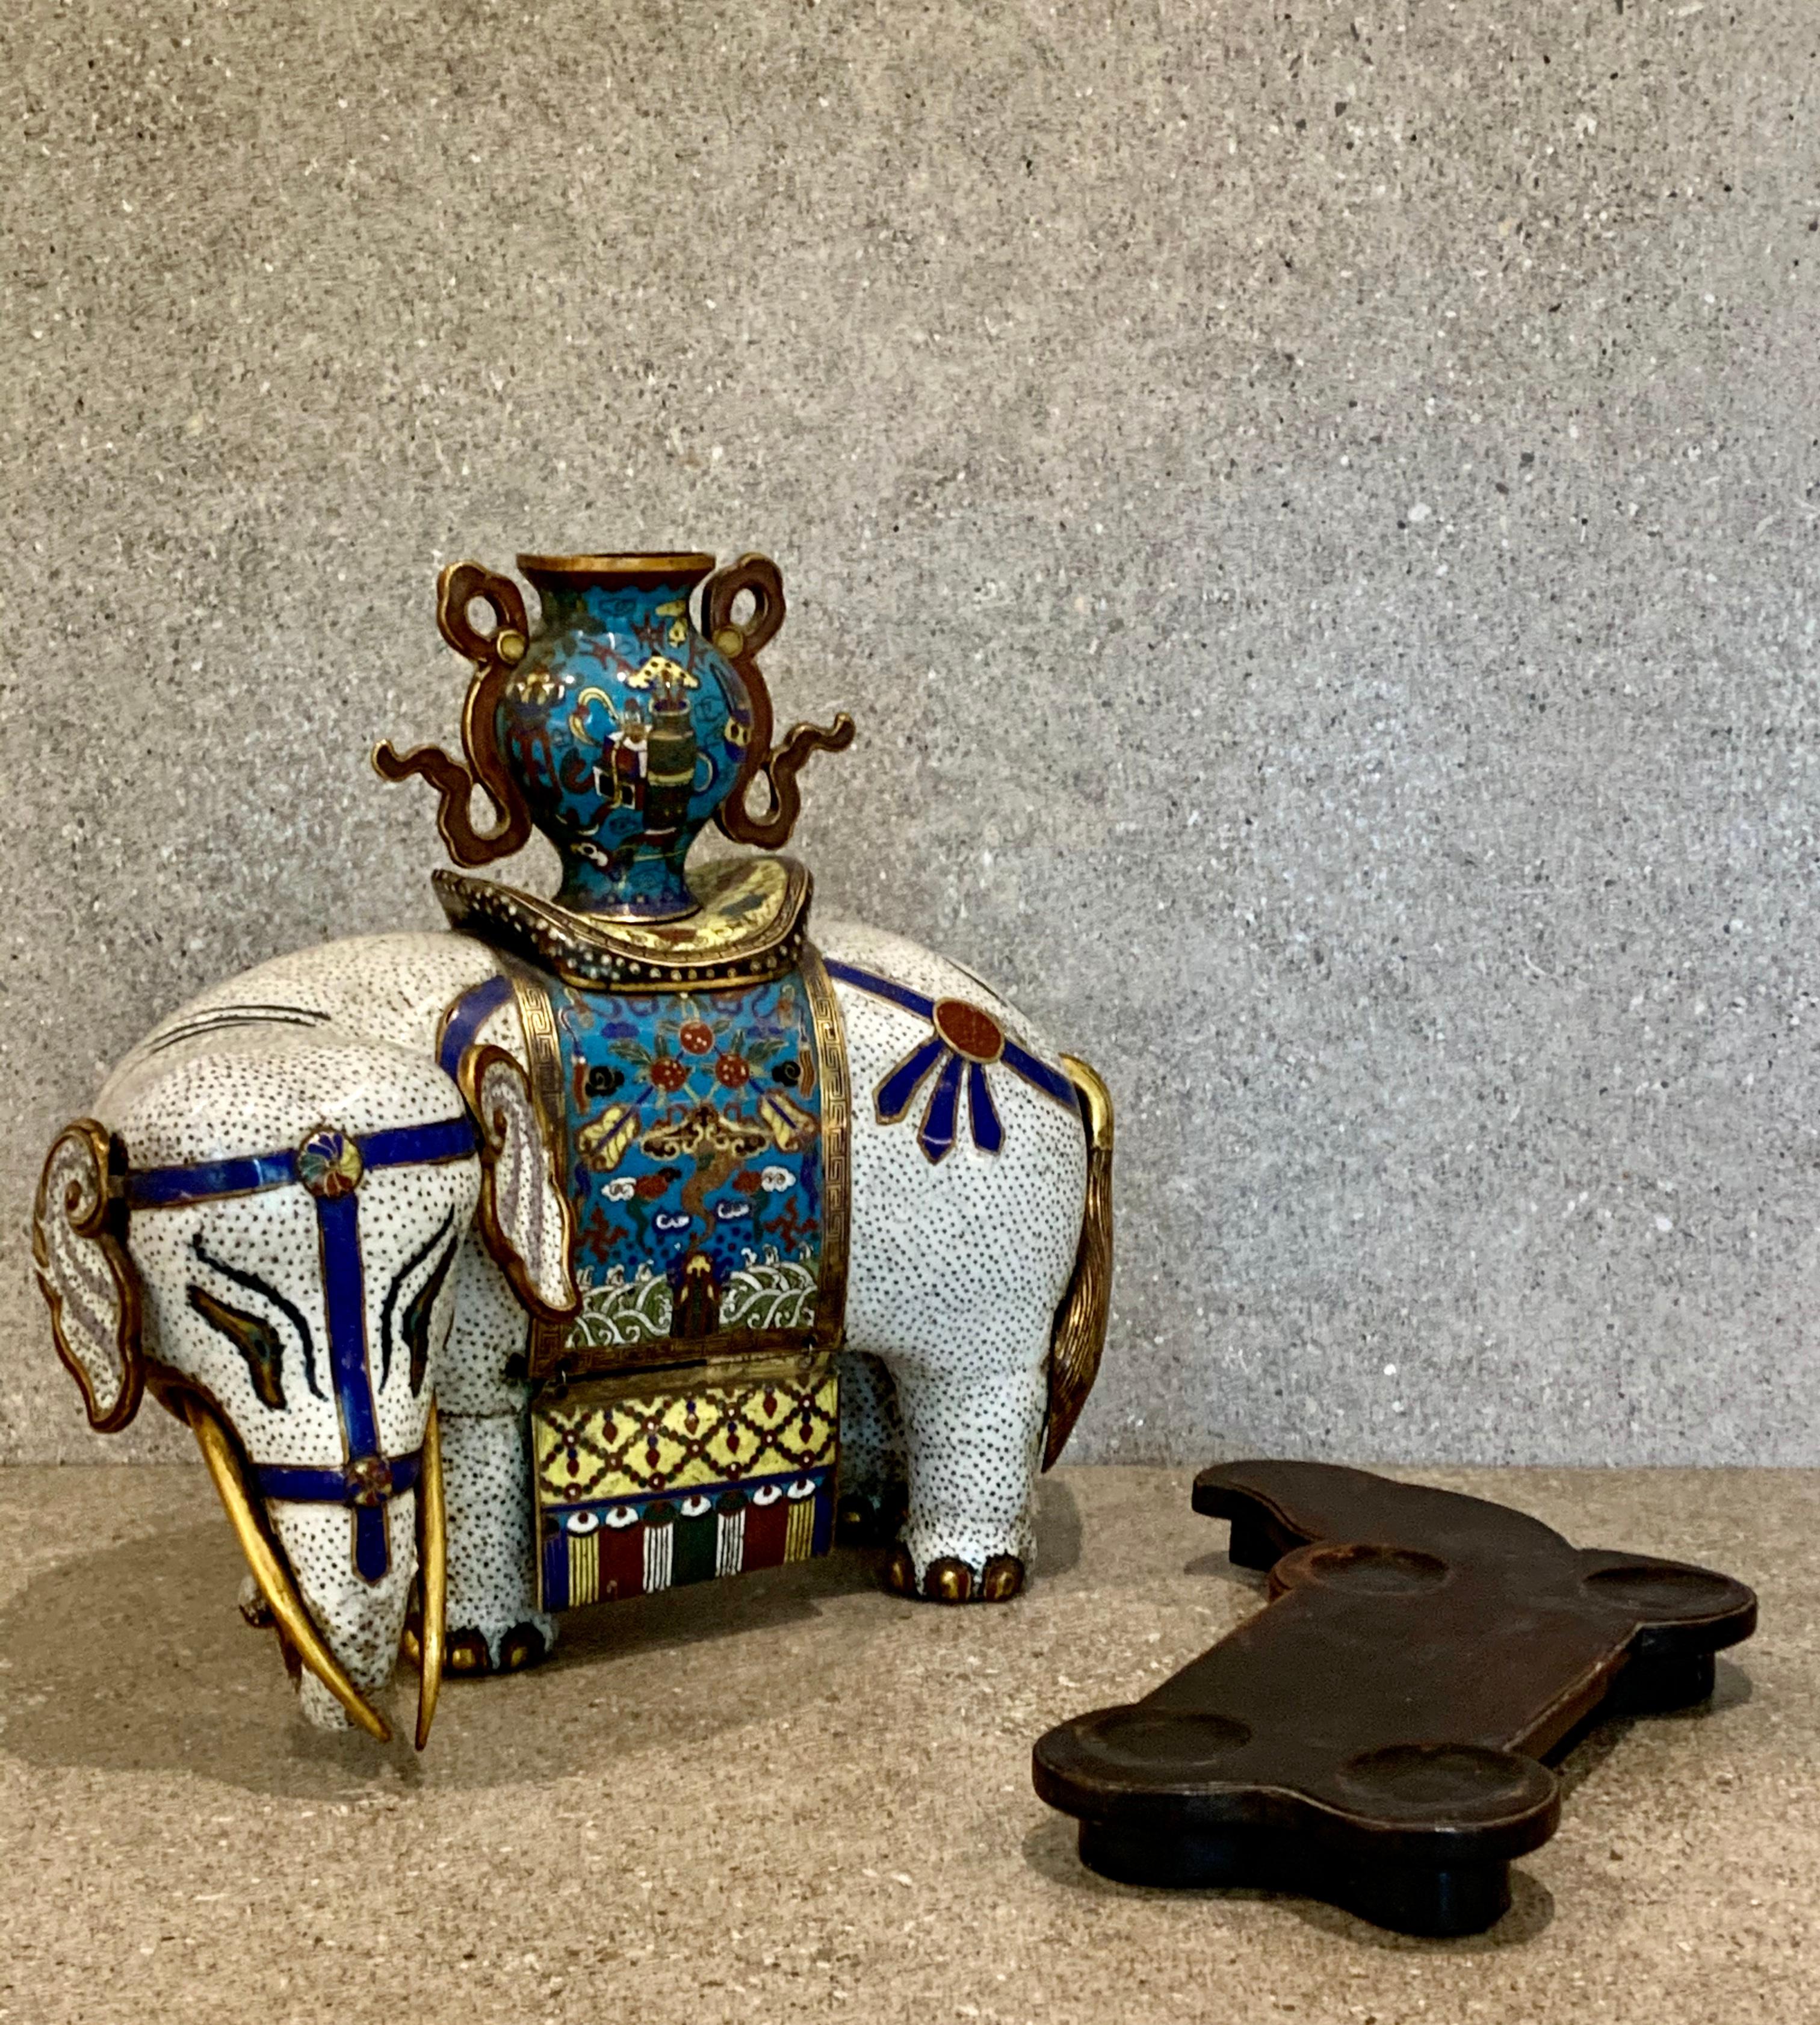 The white elephant stands turning its head to sinister, its saddle blanket decorated with fruits and precious objects over crashing waves, with a vase decorated with antiques upon the animal's back, the ears removable, together with a wood stand,